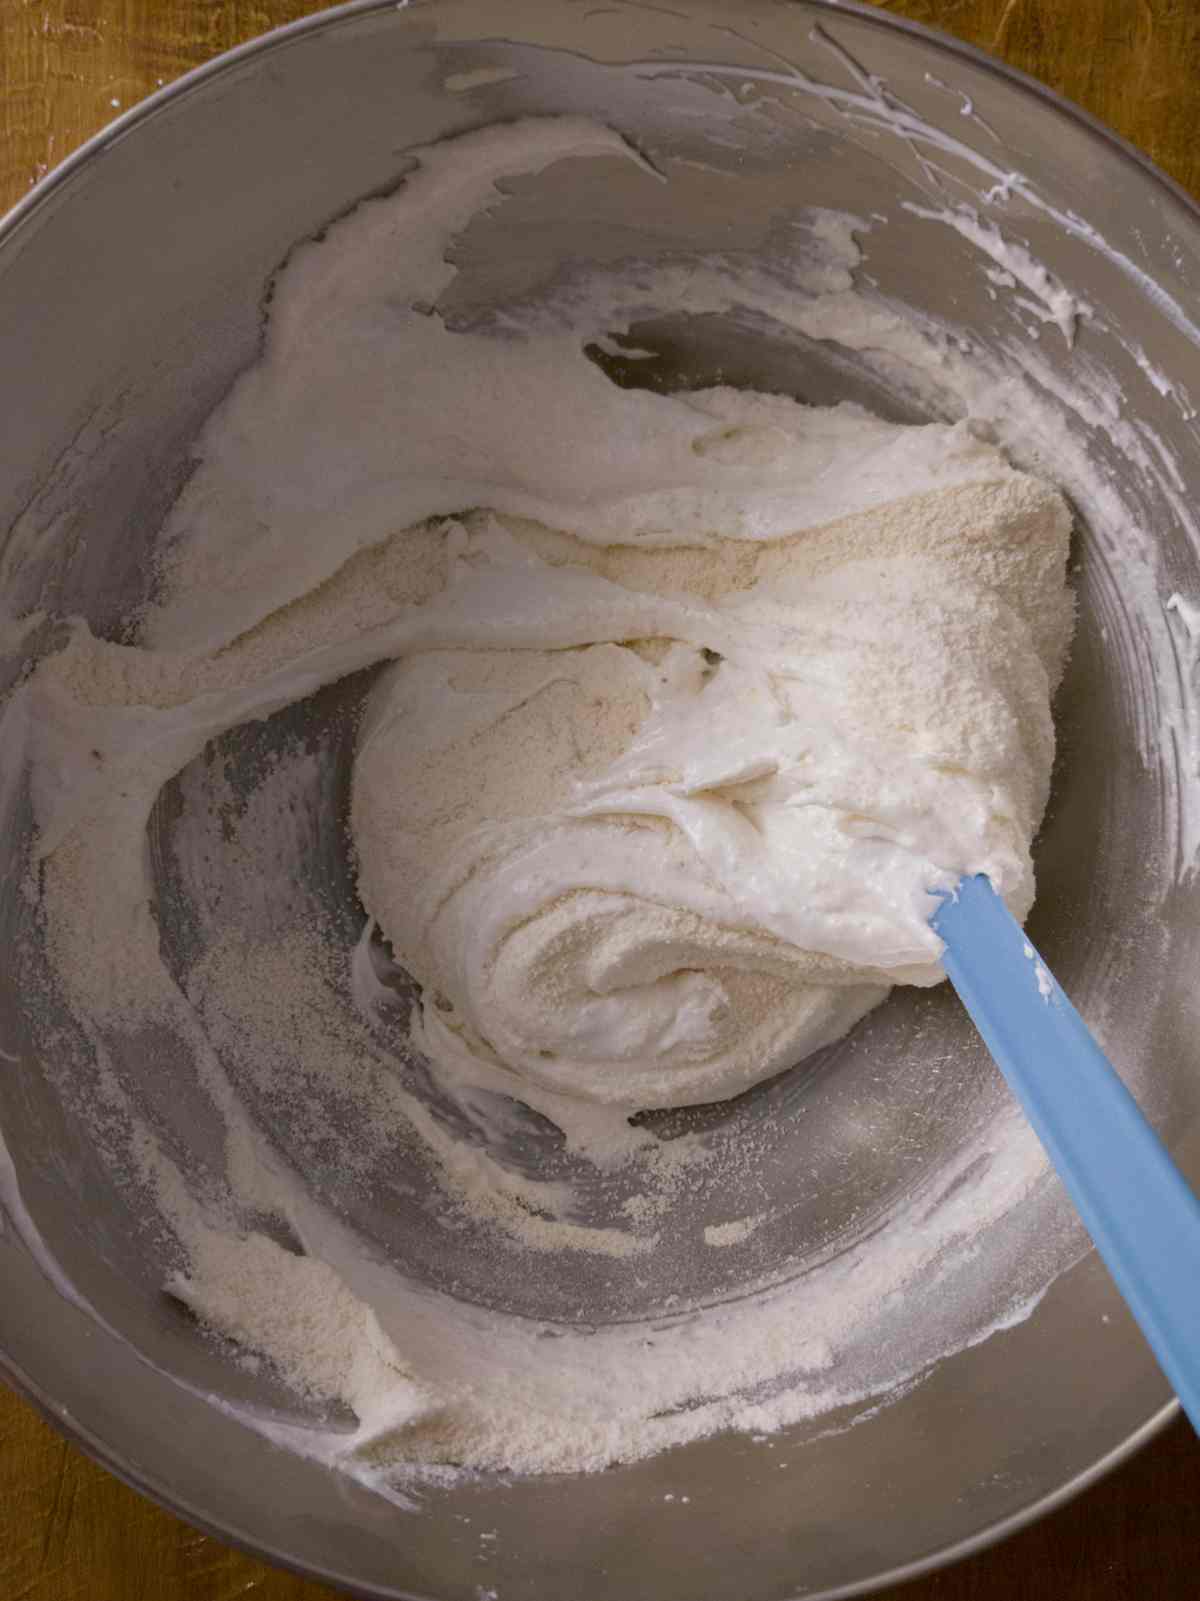 Folding flour into the egg whites with a rubber spatula.